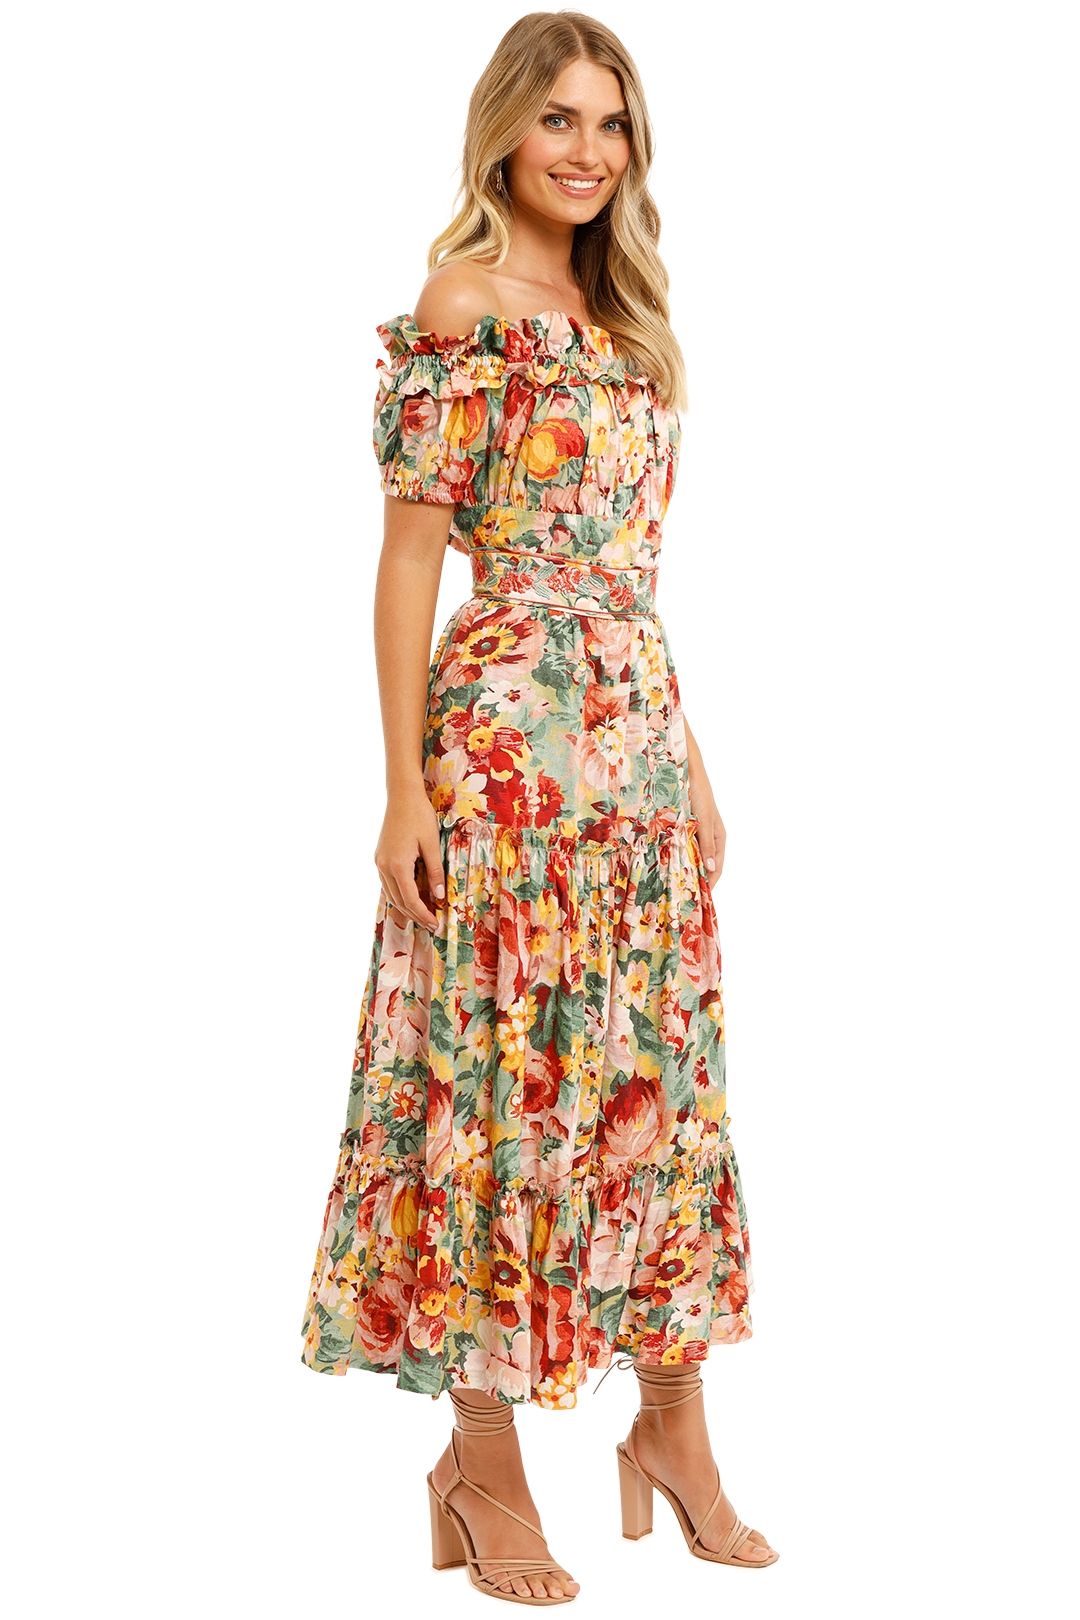 Ministry of Style Into The Garden Midi Dress Floral